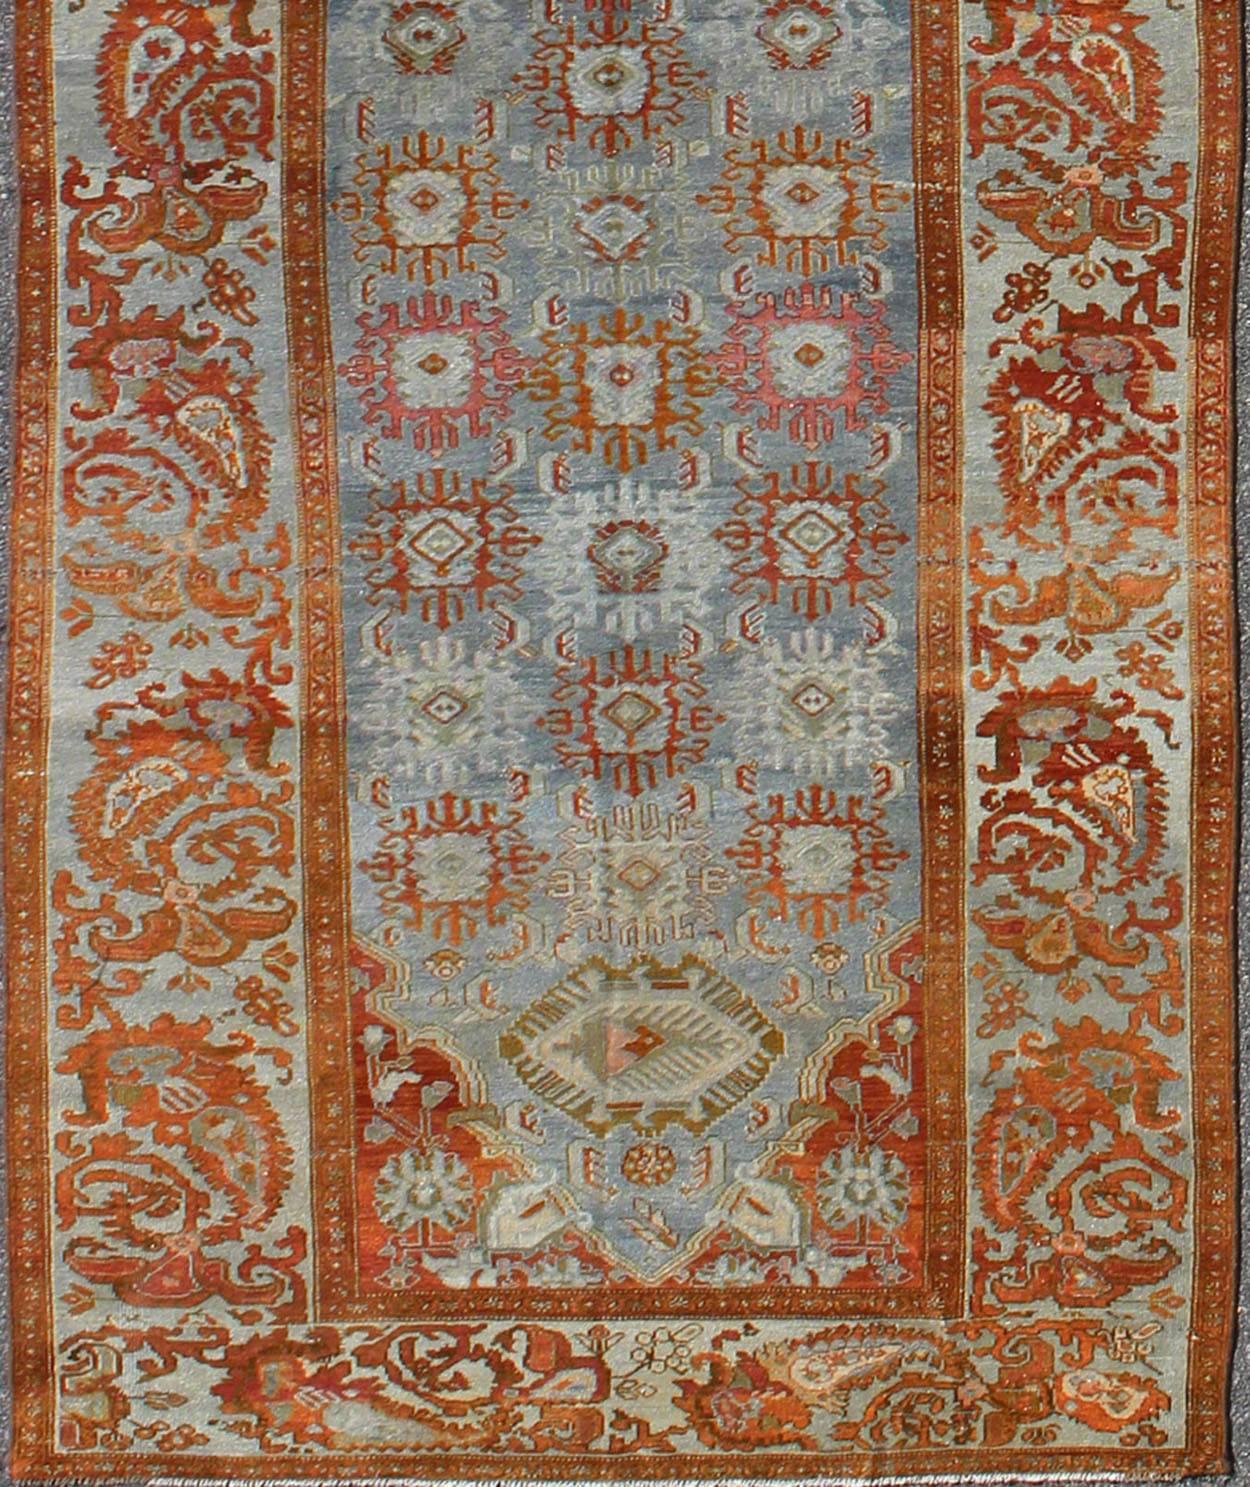 This magnificent antique Persian Malayer carpet, of an impressive size, bears a beautiful, all-over Sub-geometric design paired with a delightful palette of burnt orange, various blues and a very light peach. The central field is filled with a